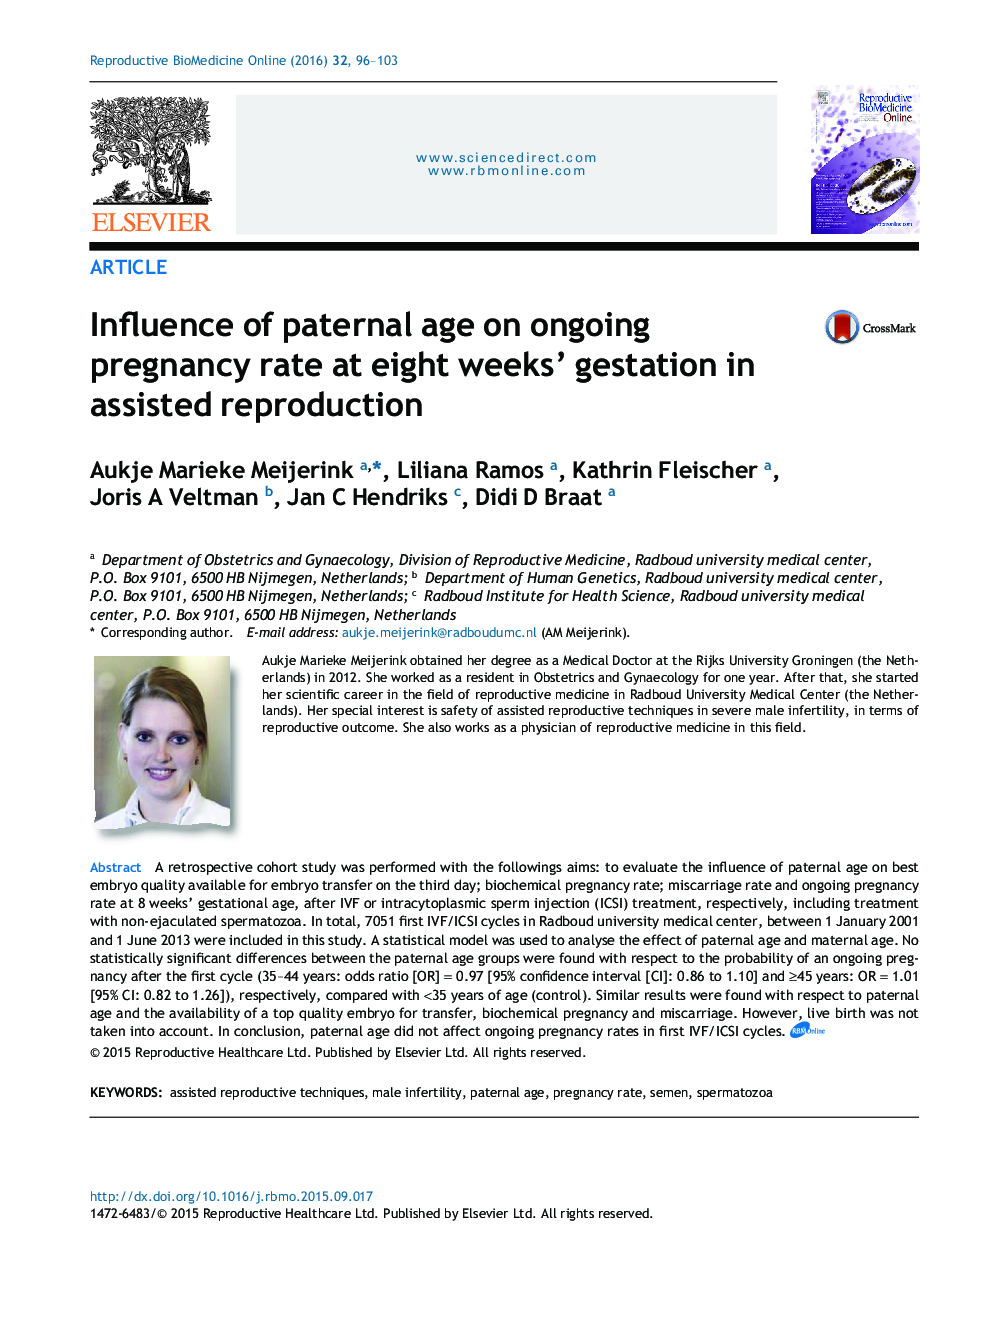 Influence of paternal age on ongoing pregnancy rate at eight weeks' gestation in assisted reproduction